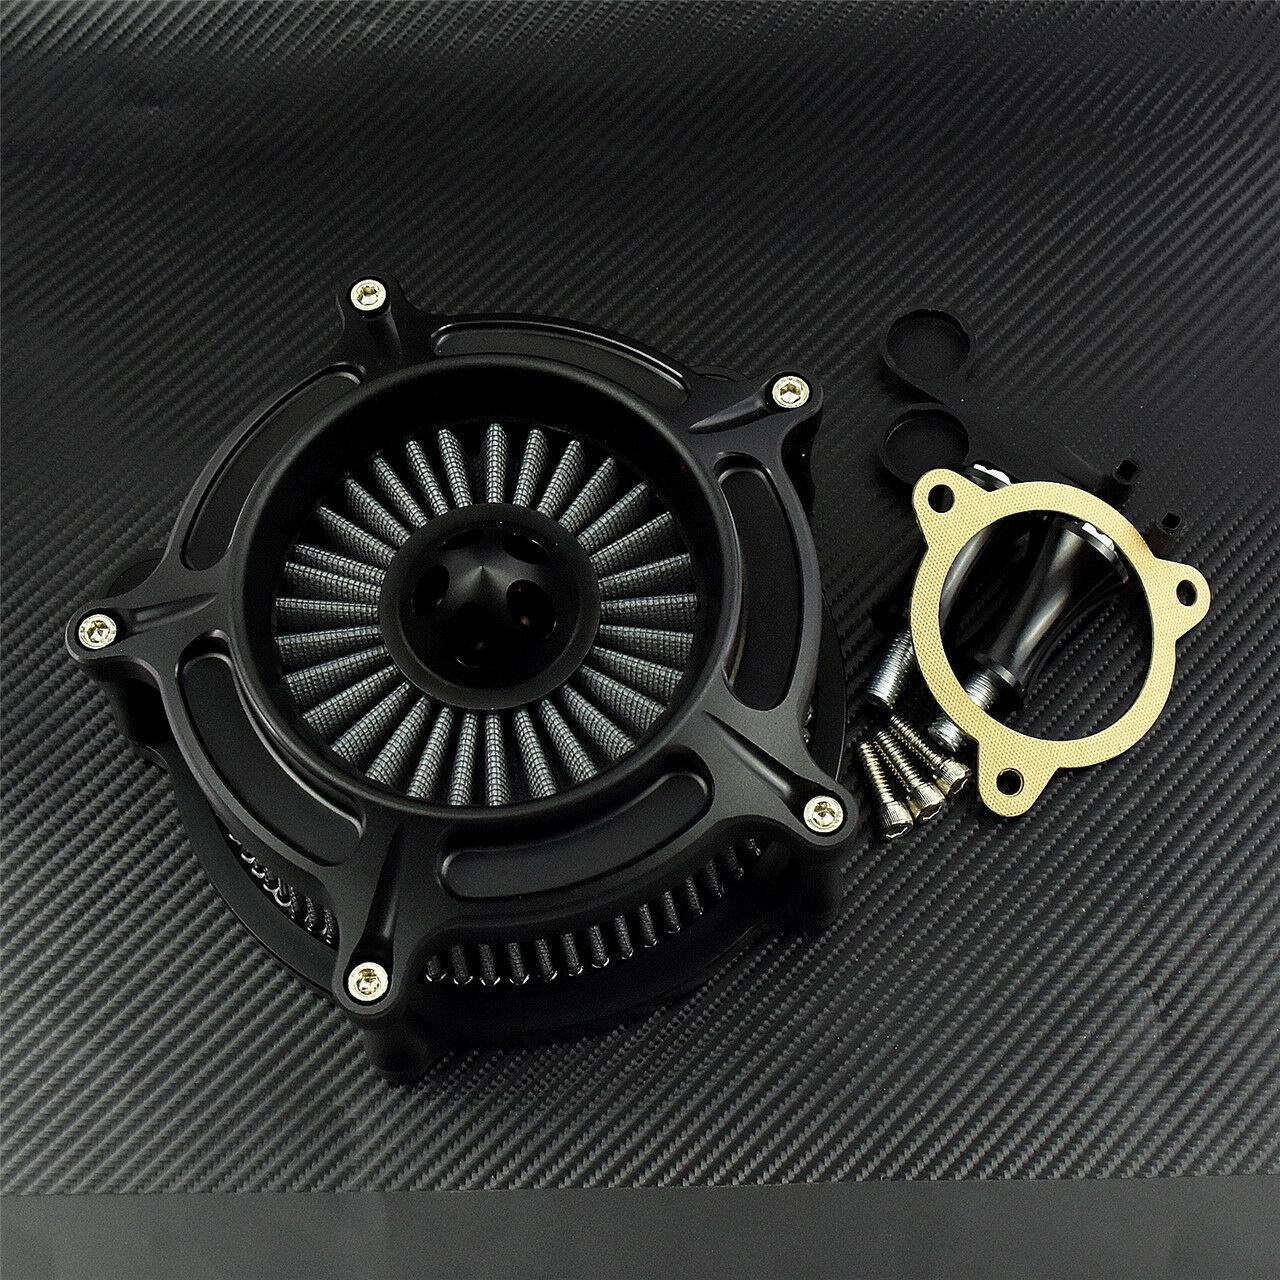 Matte Black Air Cleaner Grey Intake Filter Fit For Touring 08-16 Softail 2016 - Moto Life Products